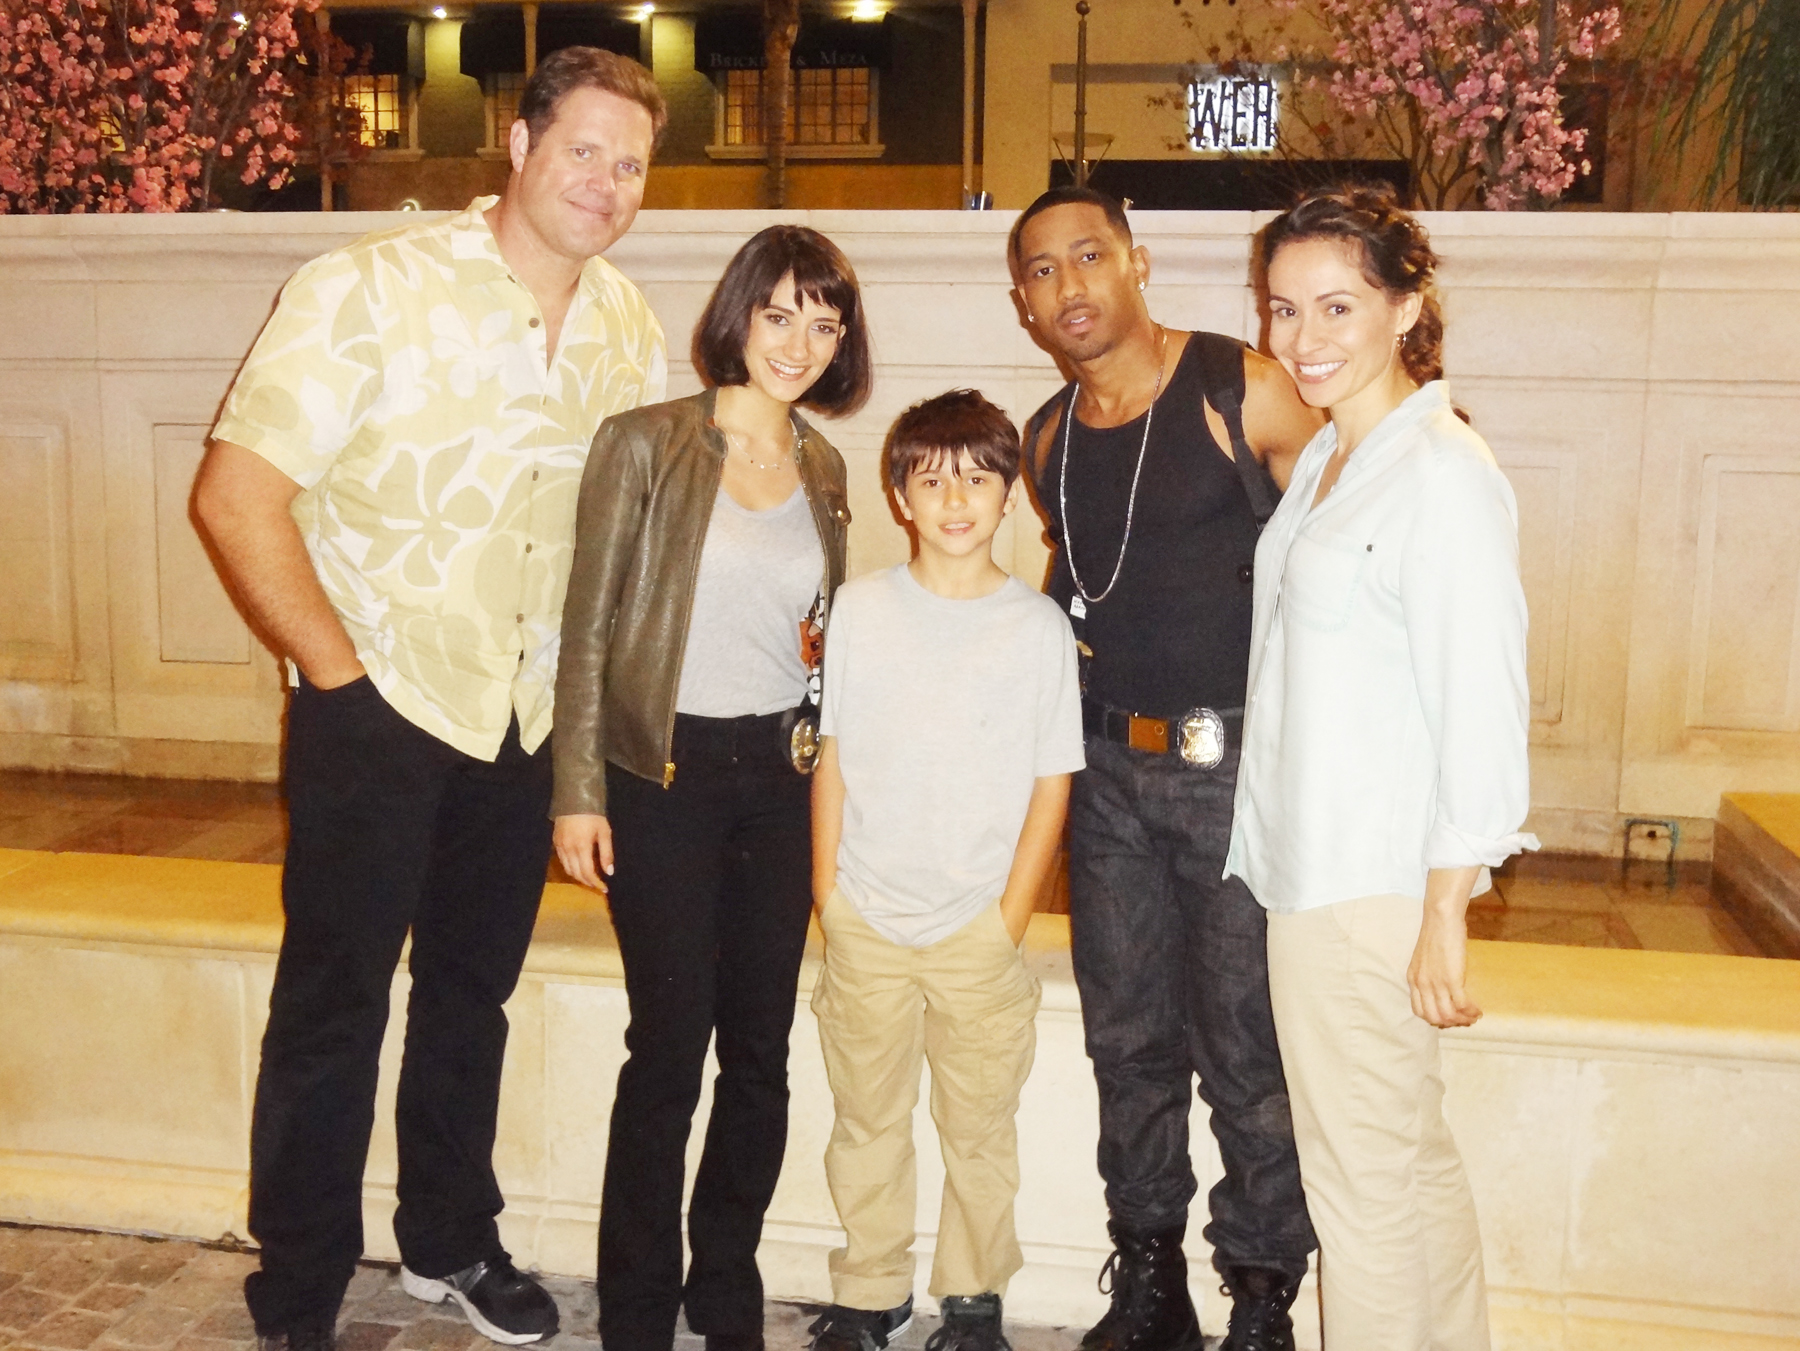 Gage with Brandon T. Jackson,Sheila Vand, David Denman and Presciliana Esparalini on the set of Beverly Hills Cop (the Pilot)